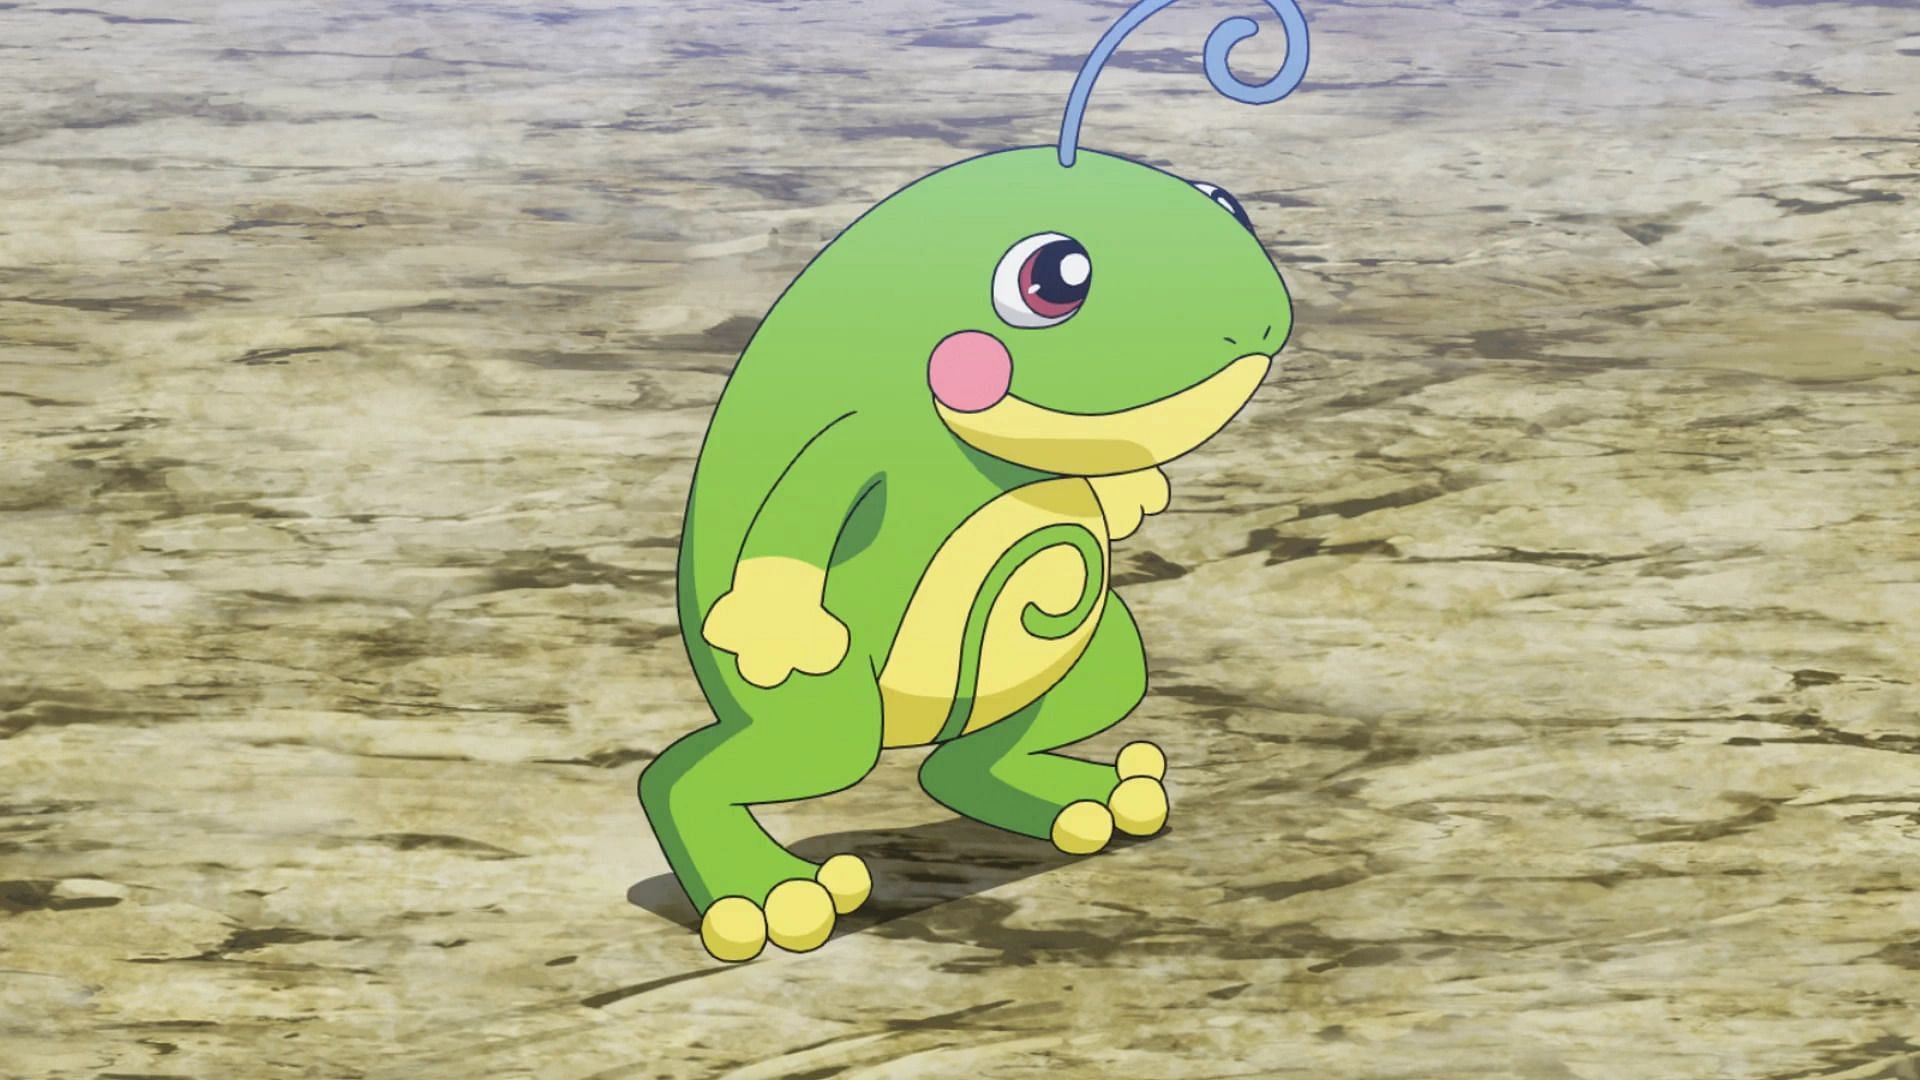 Politoed as seen in the anime (Image via The Pokemon Company)